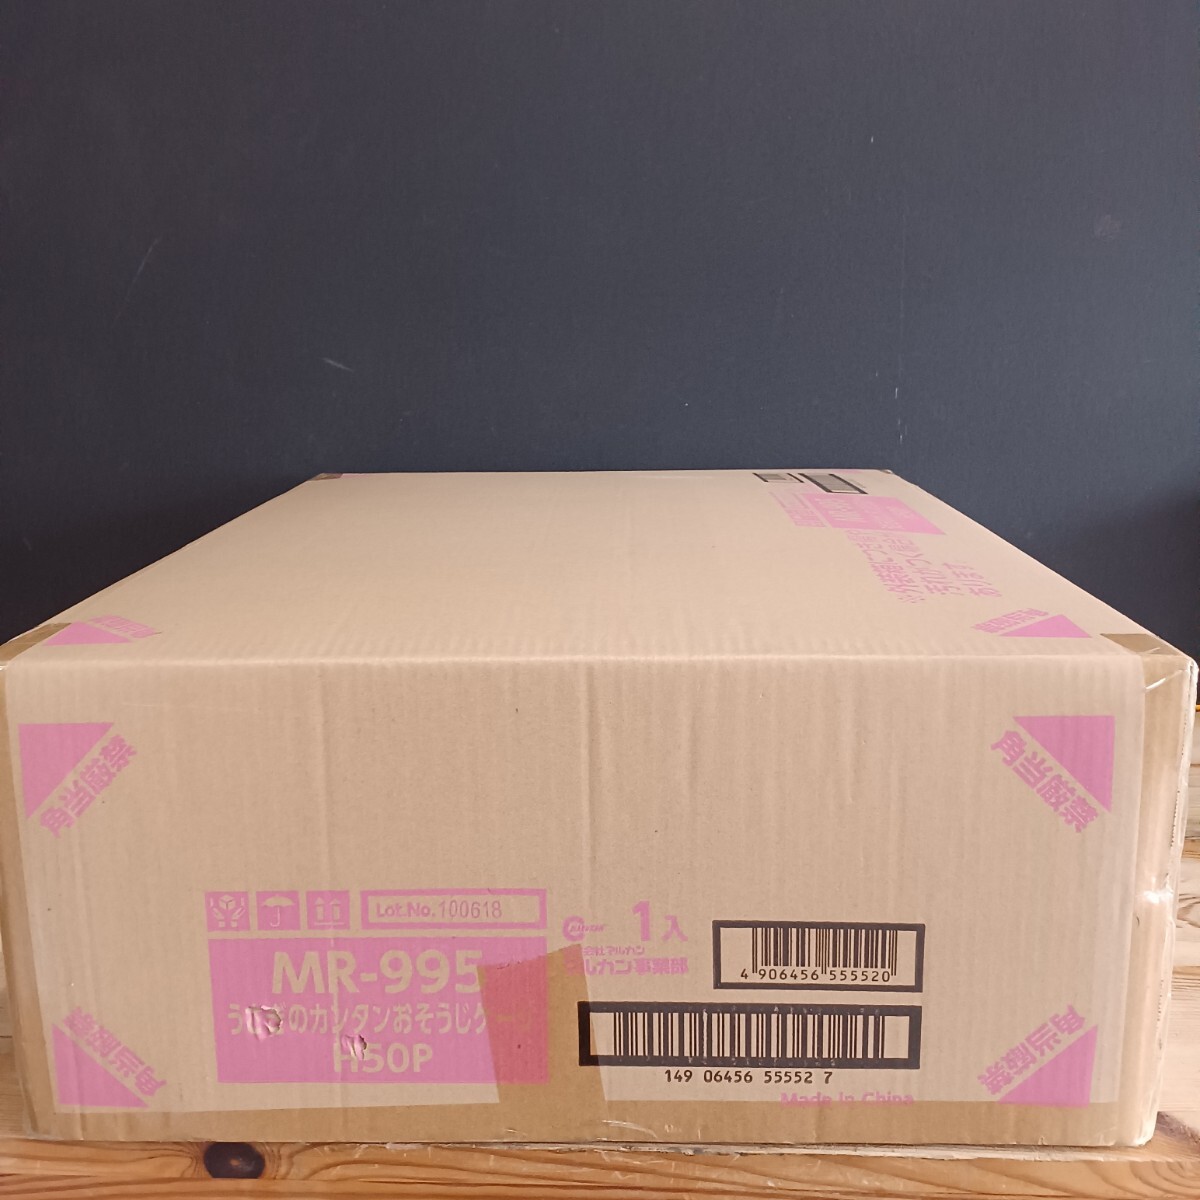 ②.... simple . seems to be . cage ma LUKA nH50P MR-995 pink unused * unopened storage goods 